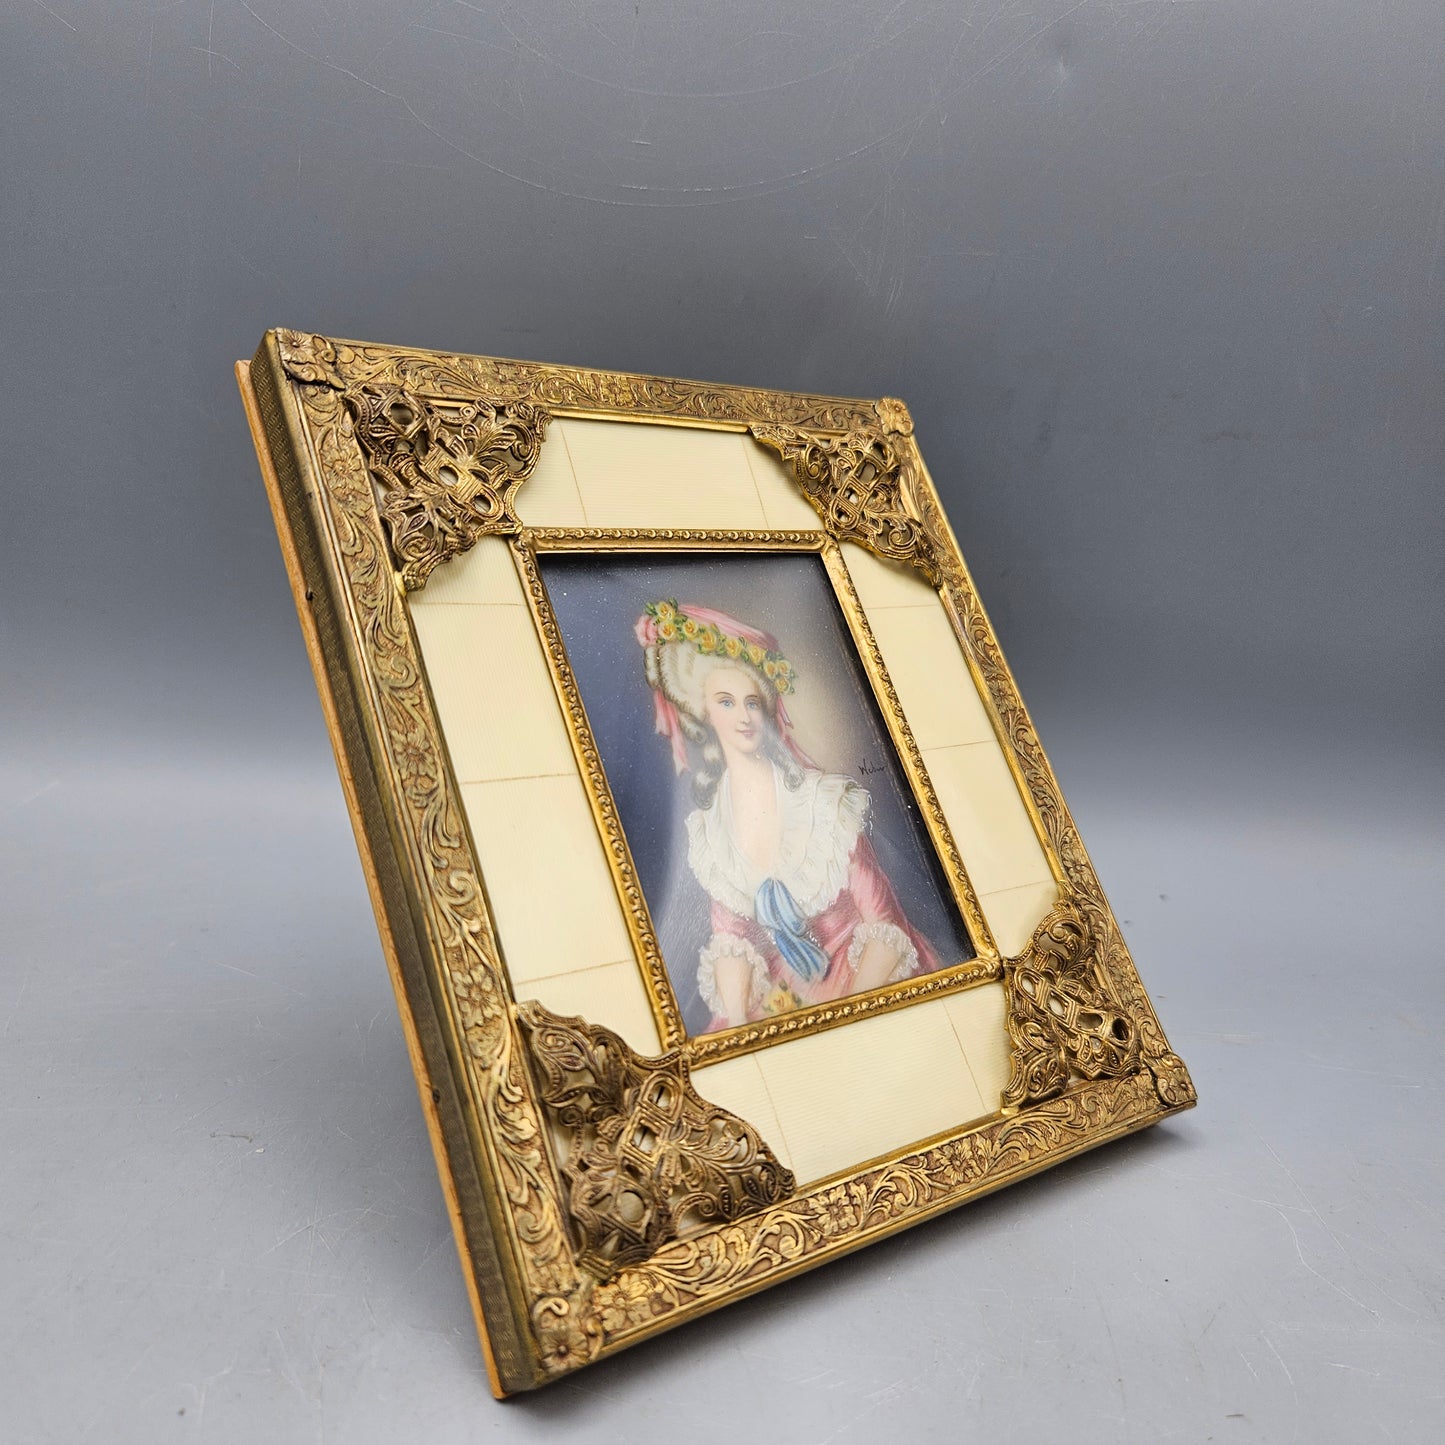 Antique Framed French Portrait of Woman in Ornate Gold Frame with Bone Design